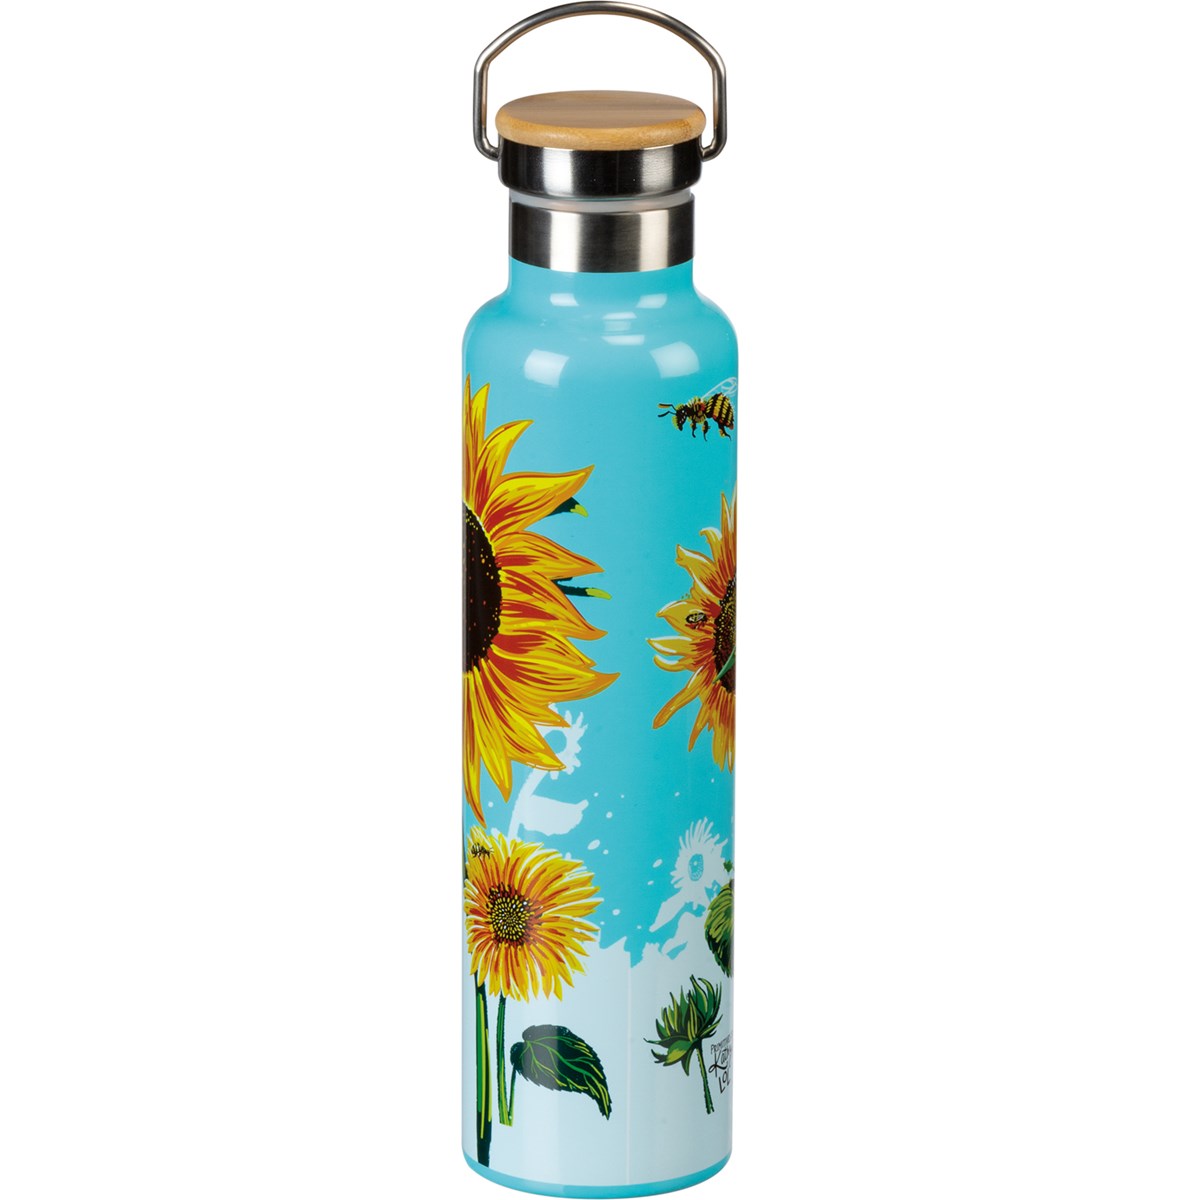 Insulated Bottle - Bee Kind - 25 oz., 2.75" Diameter x 11.25" - Stainless Steel, Bamboo